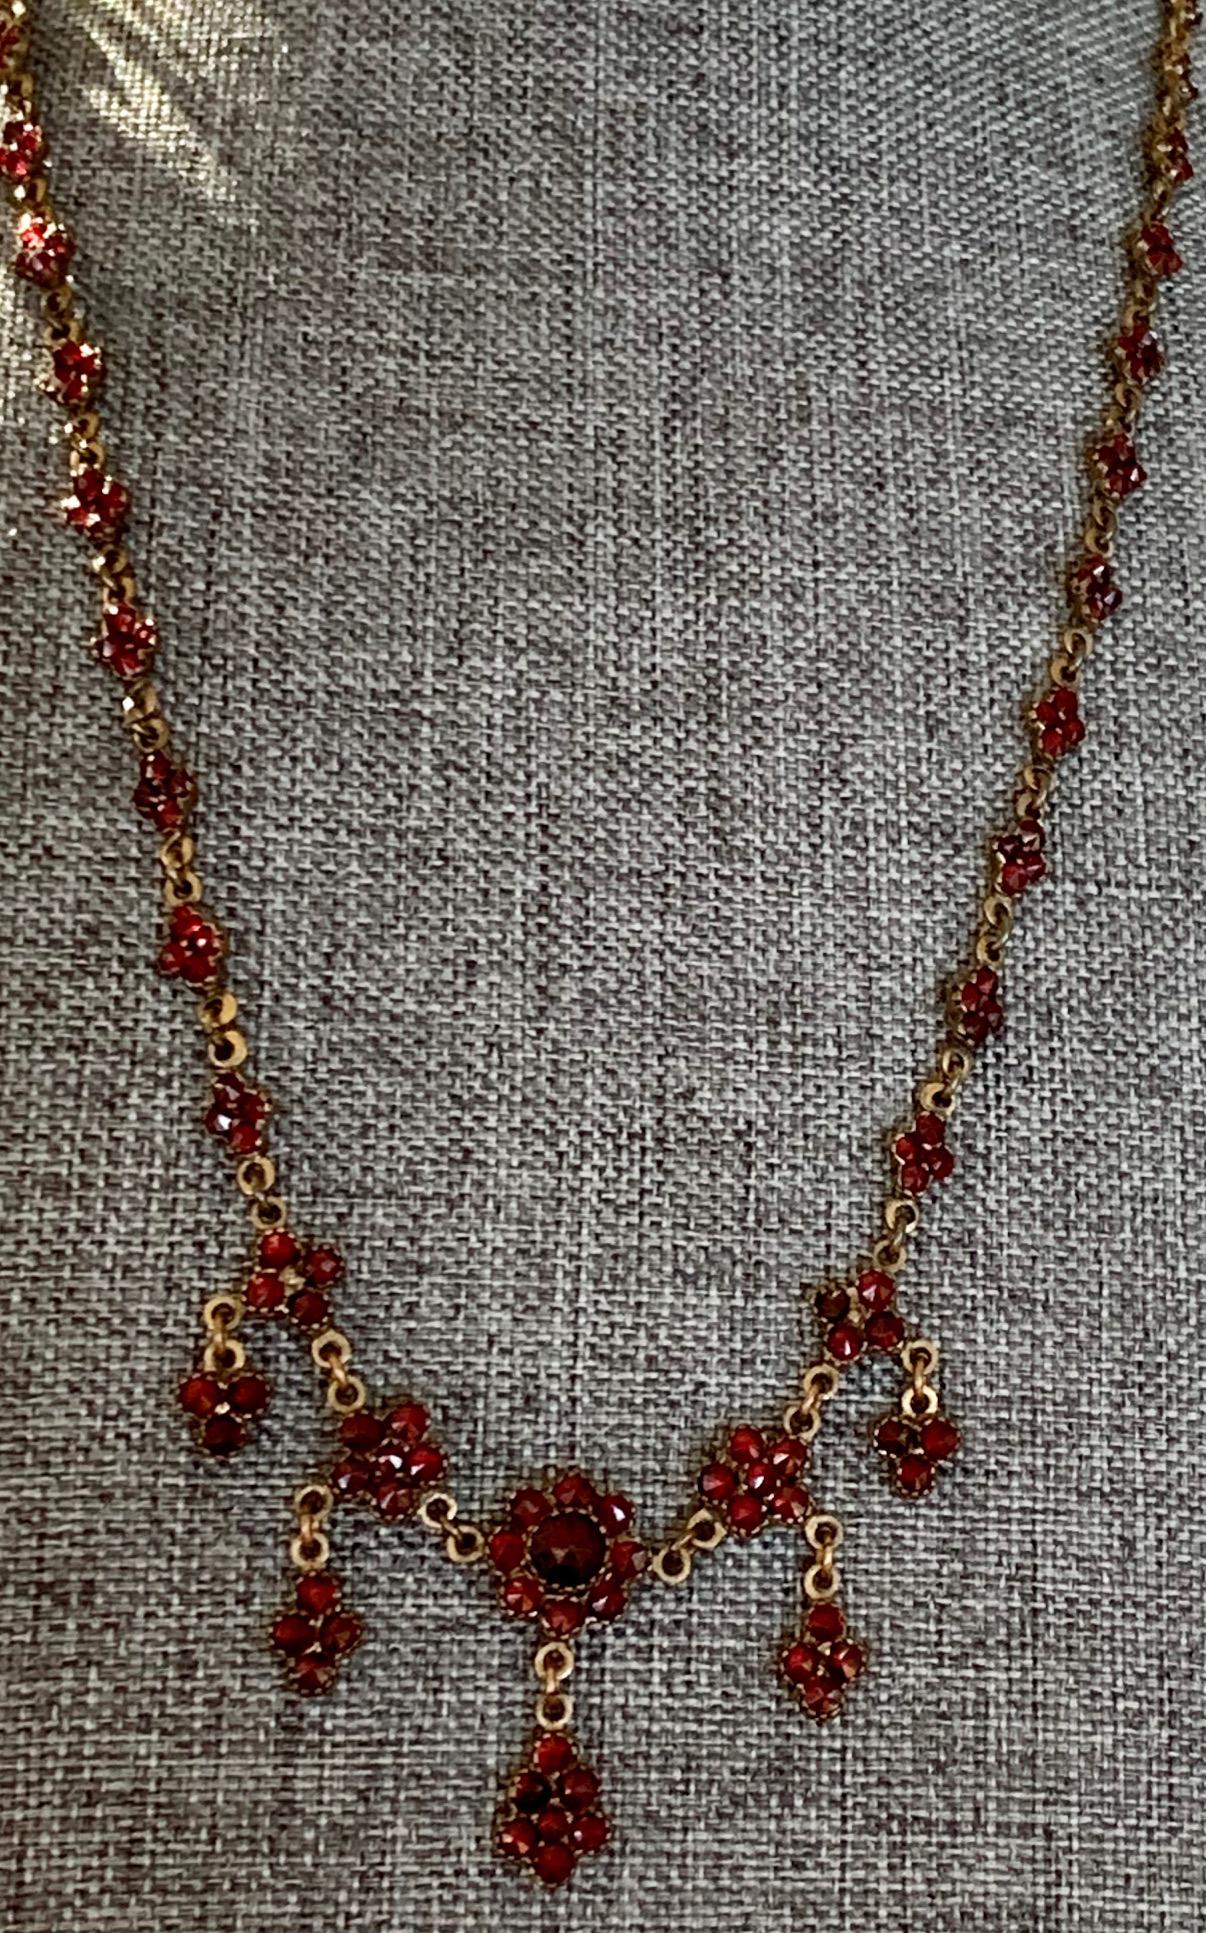 This vintage Czechoslovakian Garnet necklace is stunning.  It has five, nearly identical dangles.  The center stone and dangle is just a little larger than the other four.  The necklace is Gold washed, Gold filled.
Length: 22